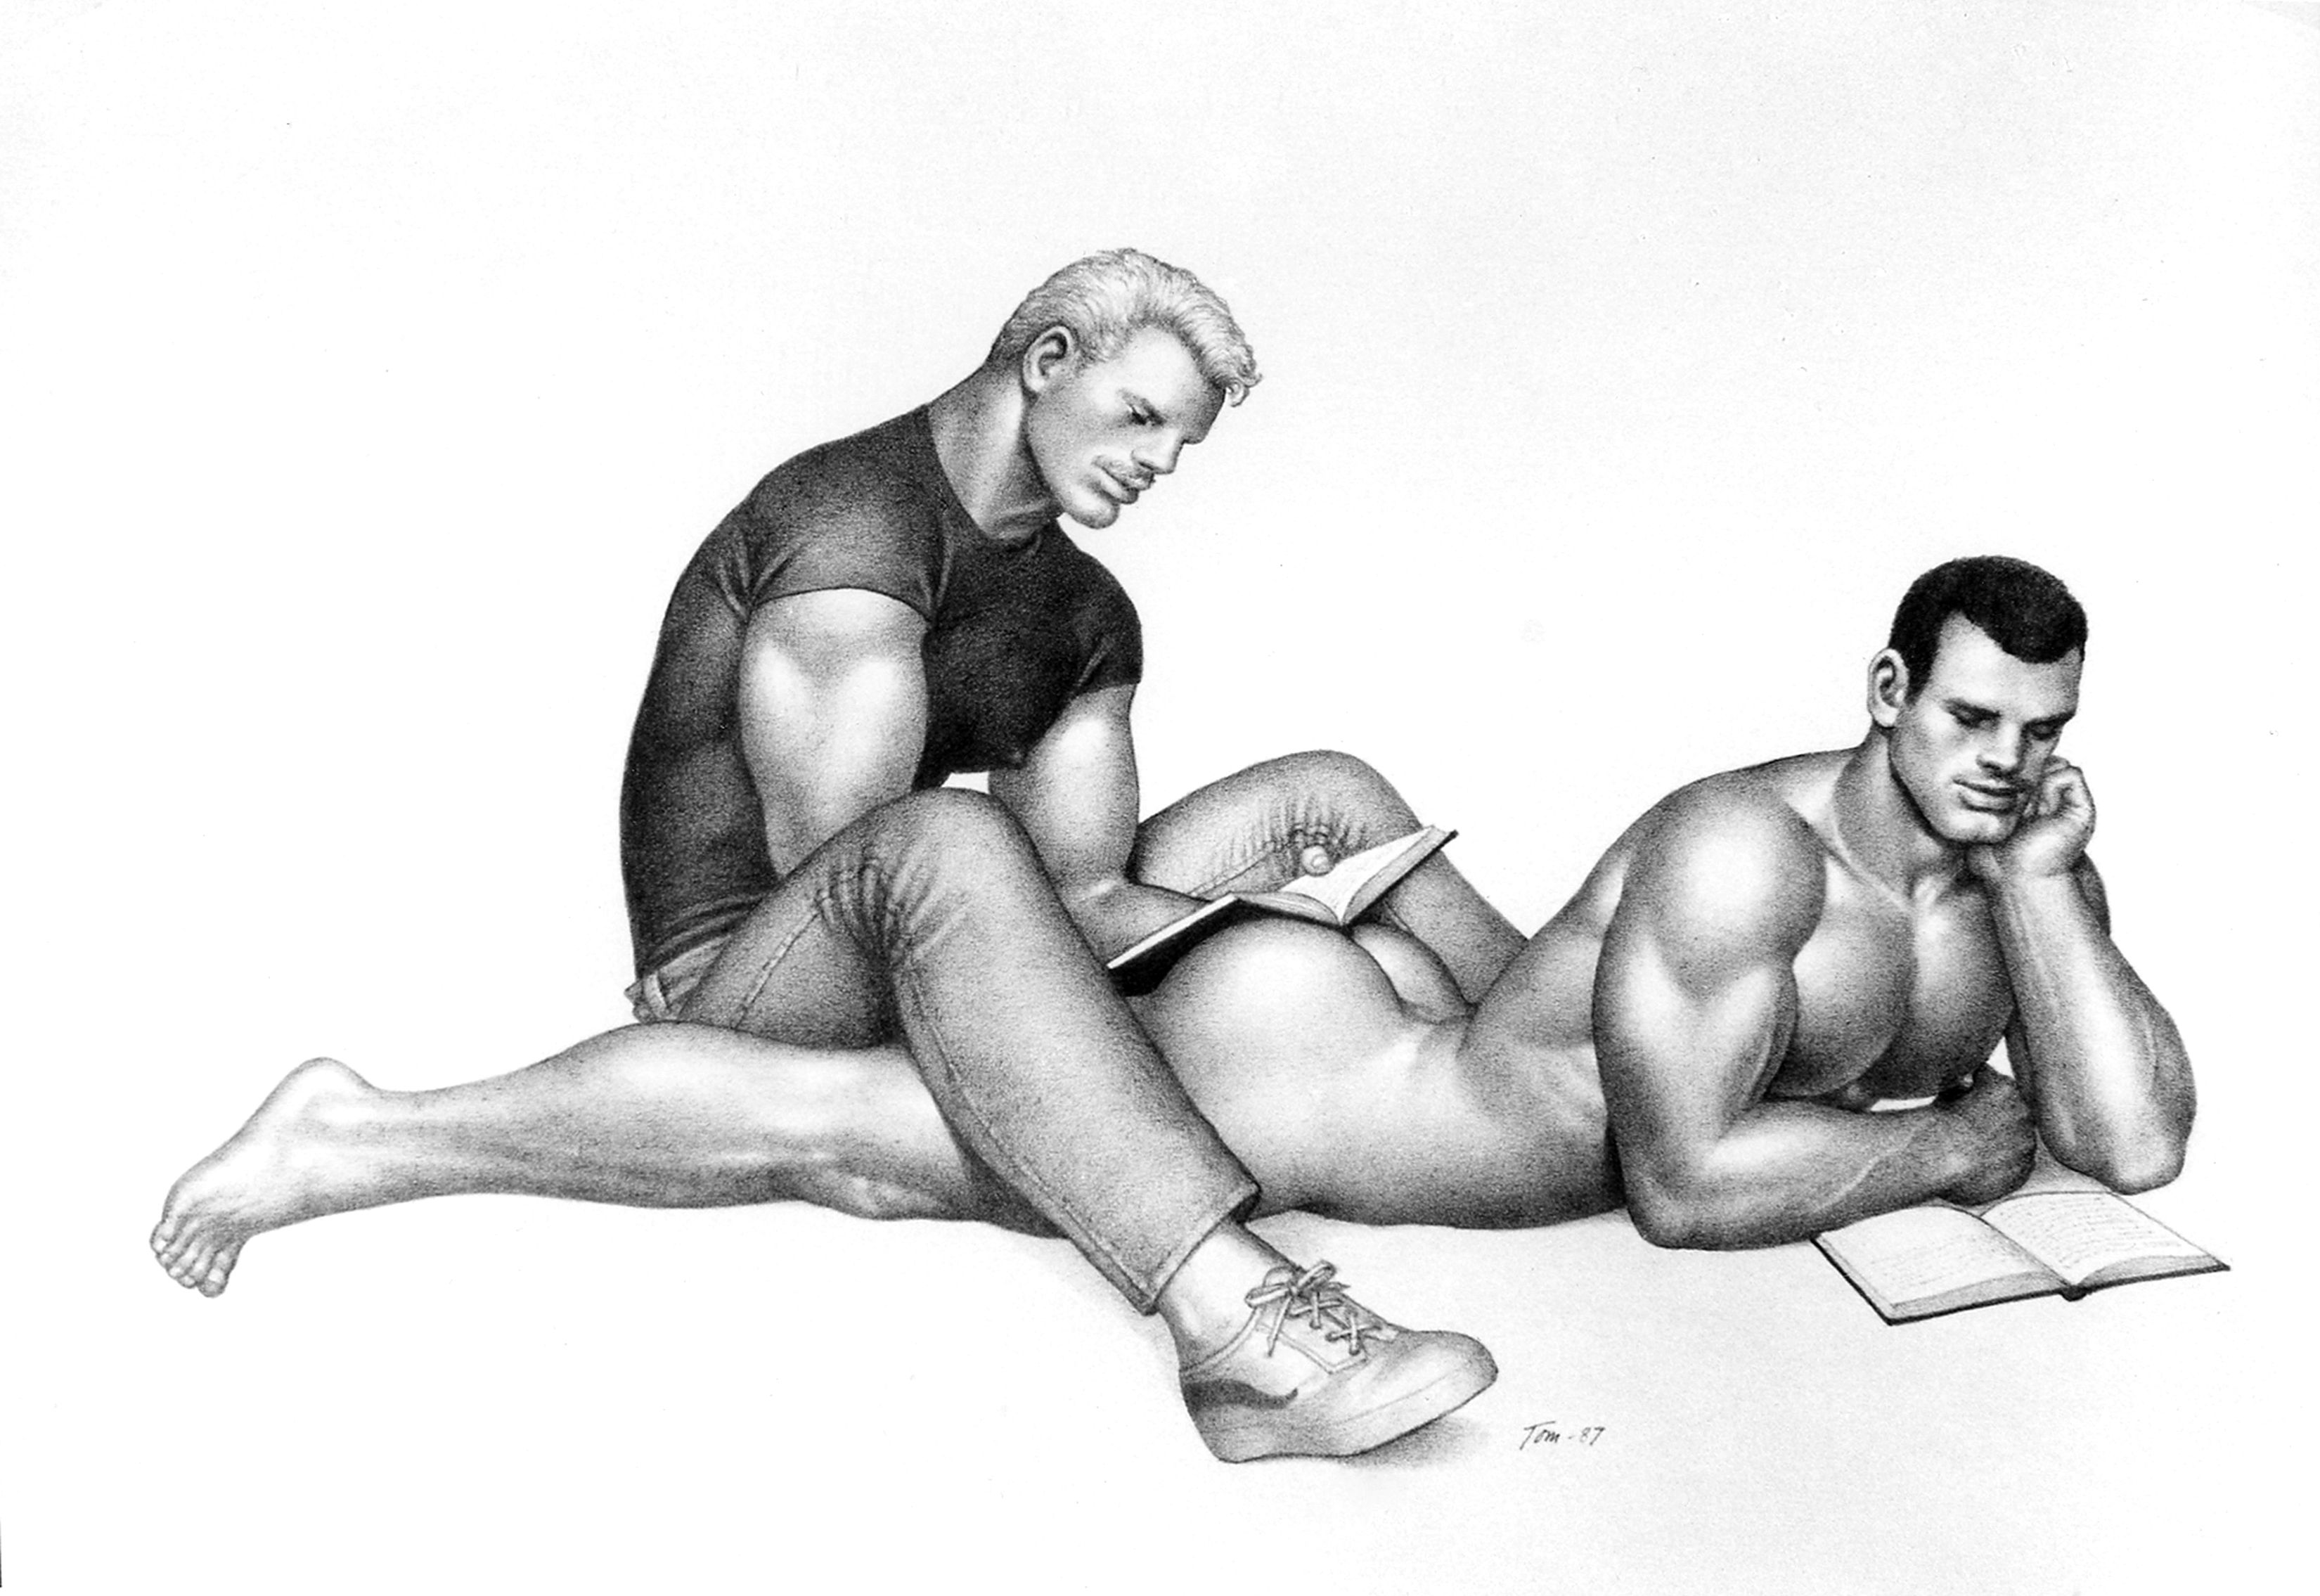 Nazi Gay Sex Drawing - There's A Gay Tom Of Finland Porno Stashed In Your Wardrobe